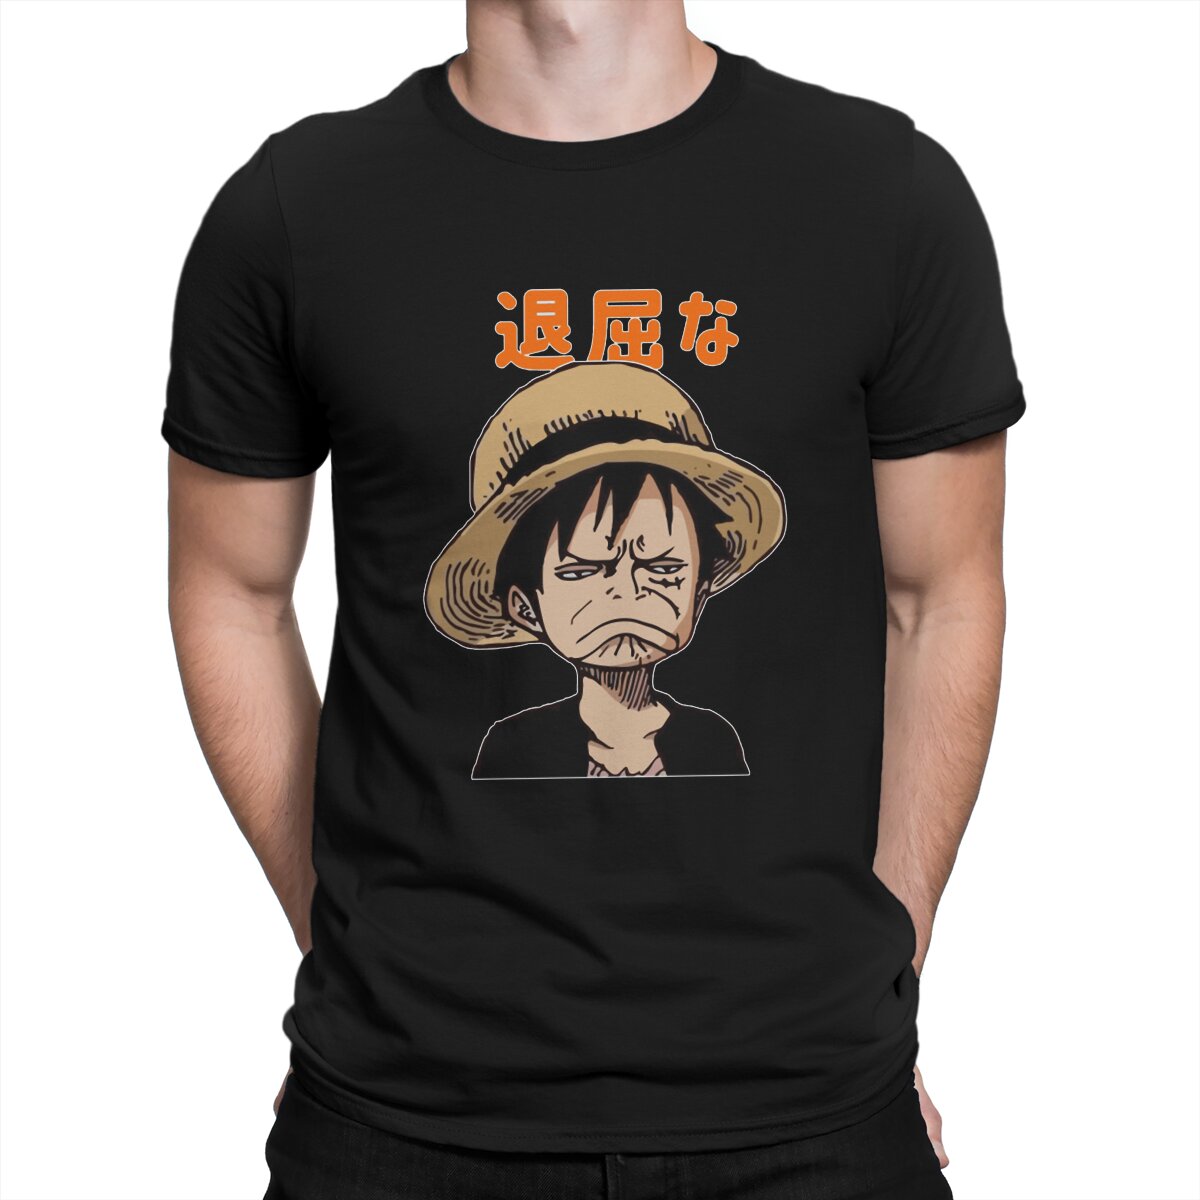 One Piece – Luffy Funny Face T-Shirts (2 Designs) T-Shirts & Tank Tops